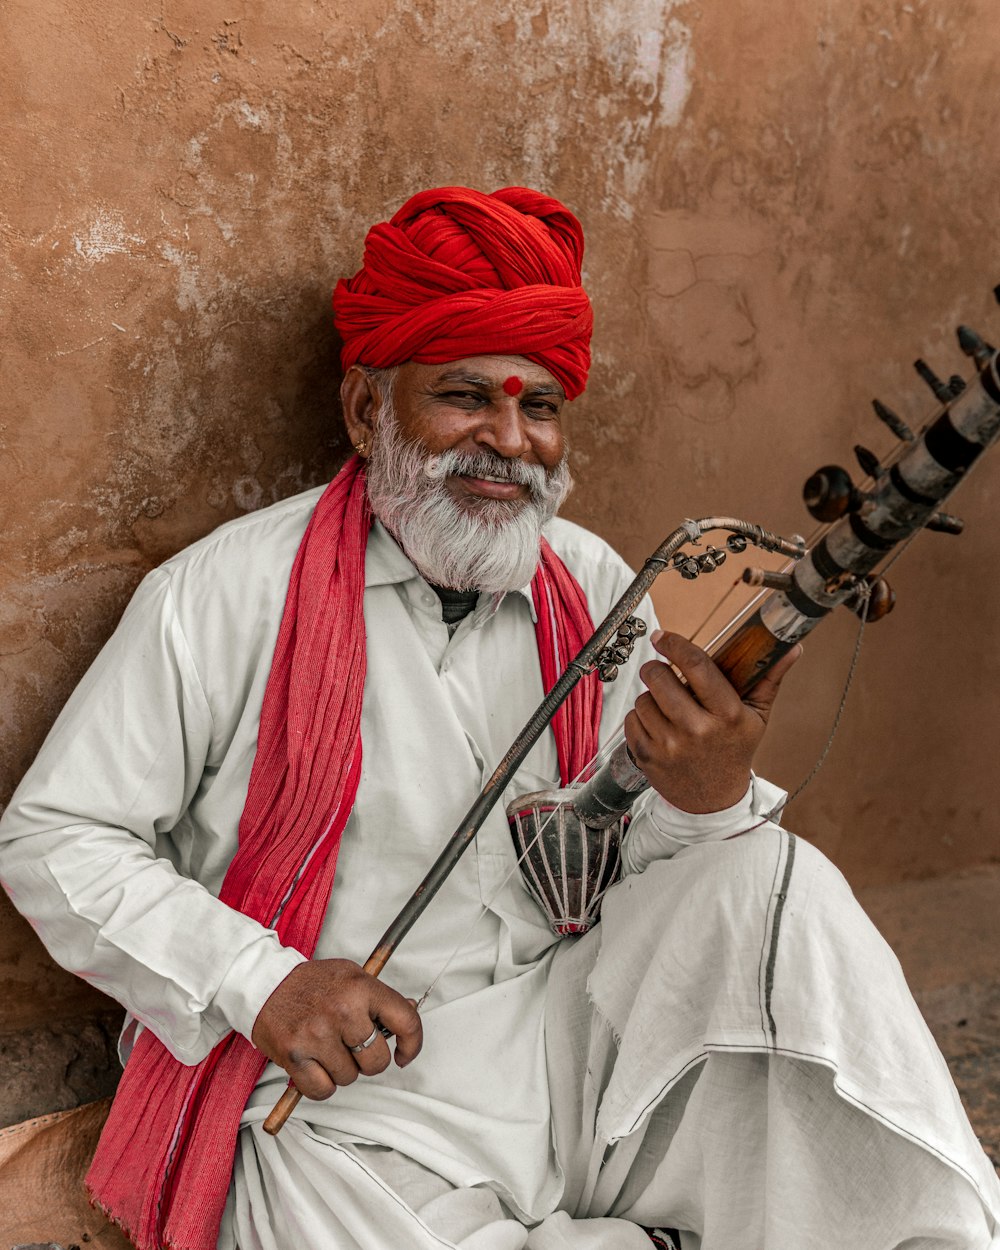 a man with a red turban playing a musical instrument